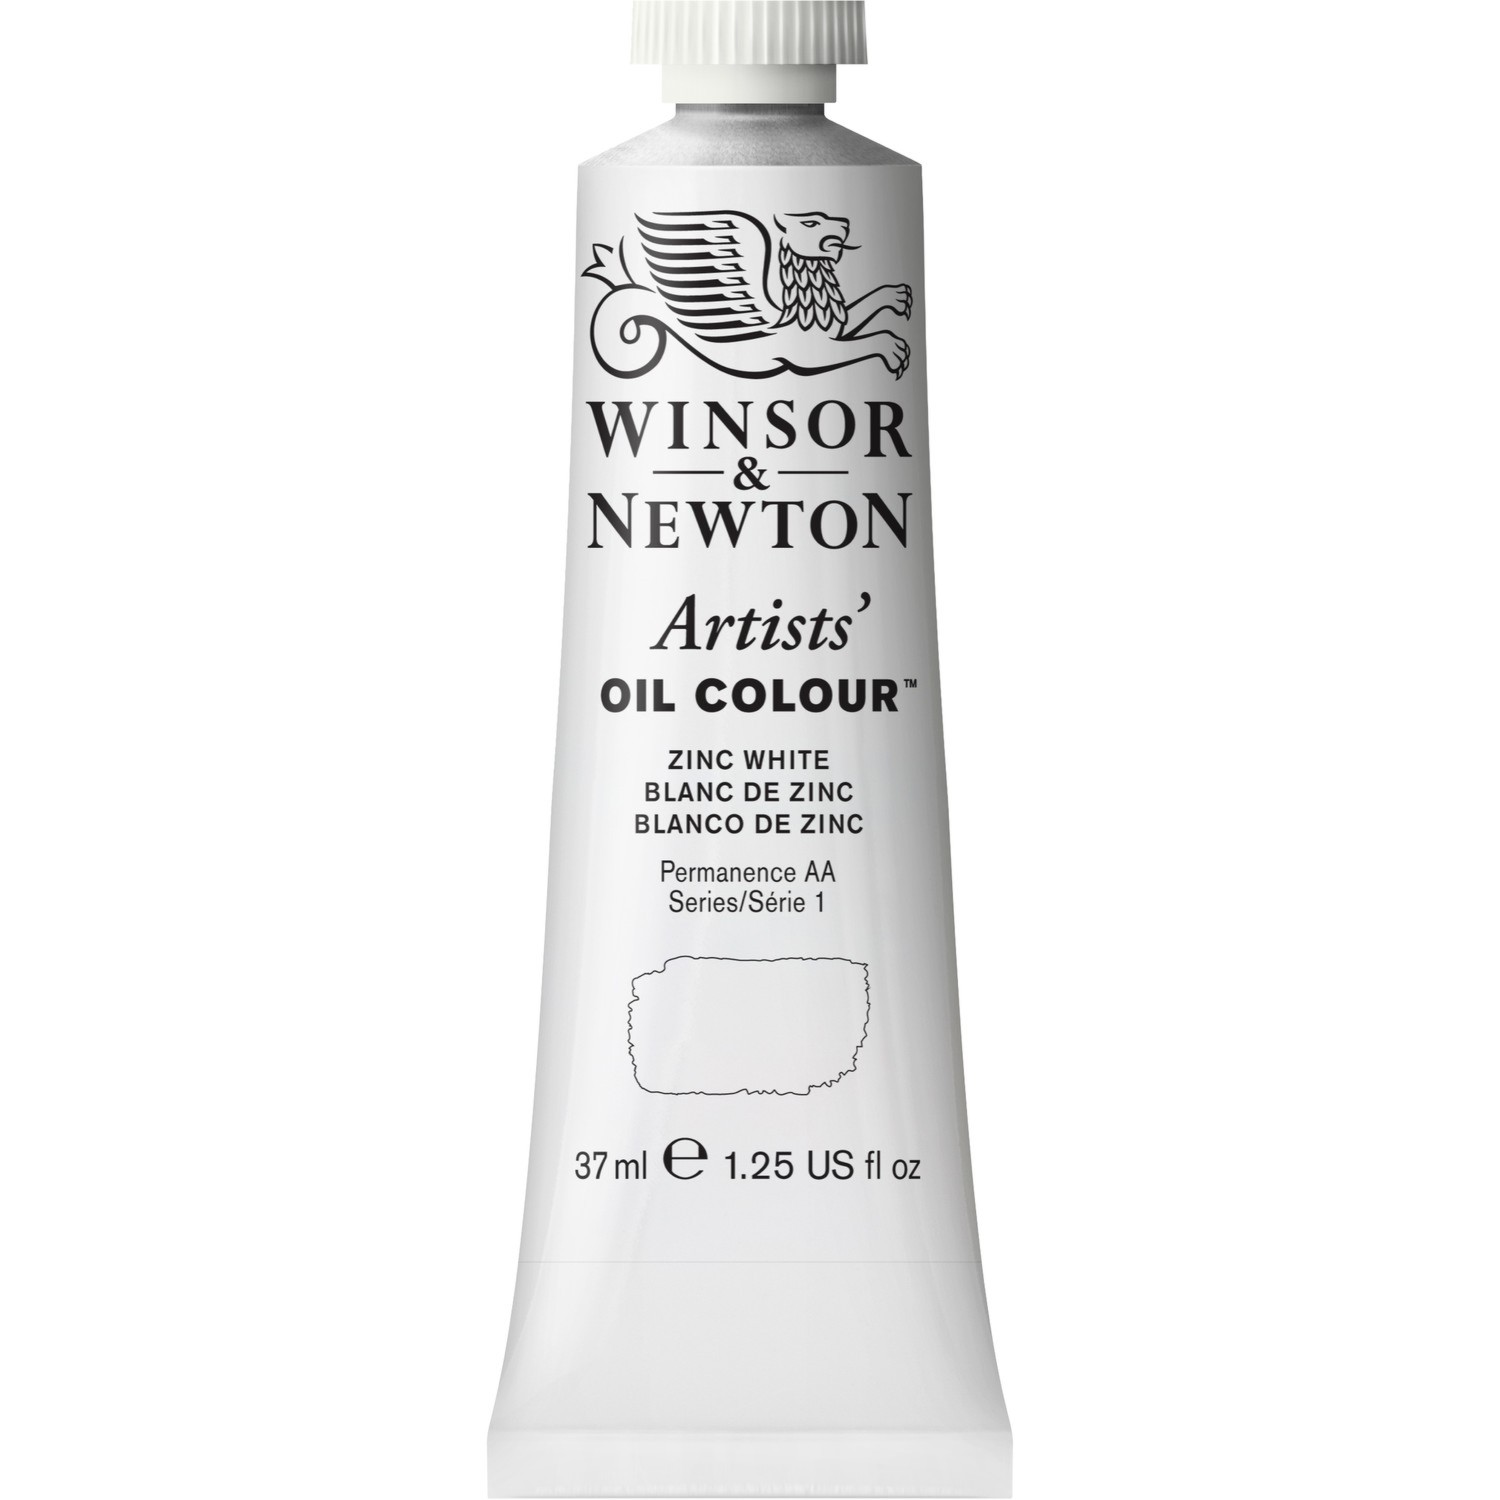 Winsor and Newton 37ml Artists' Oil Colours - Zinc White Image 1